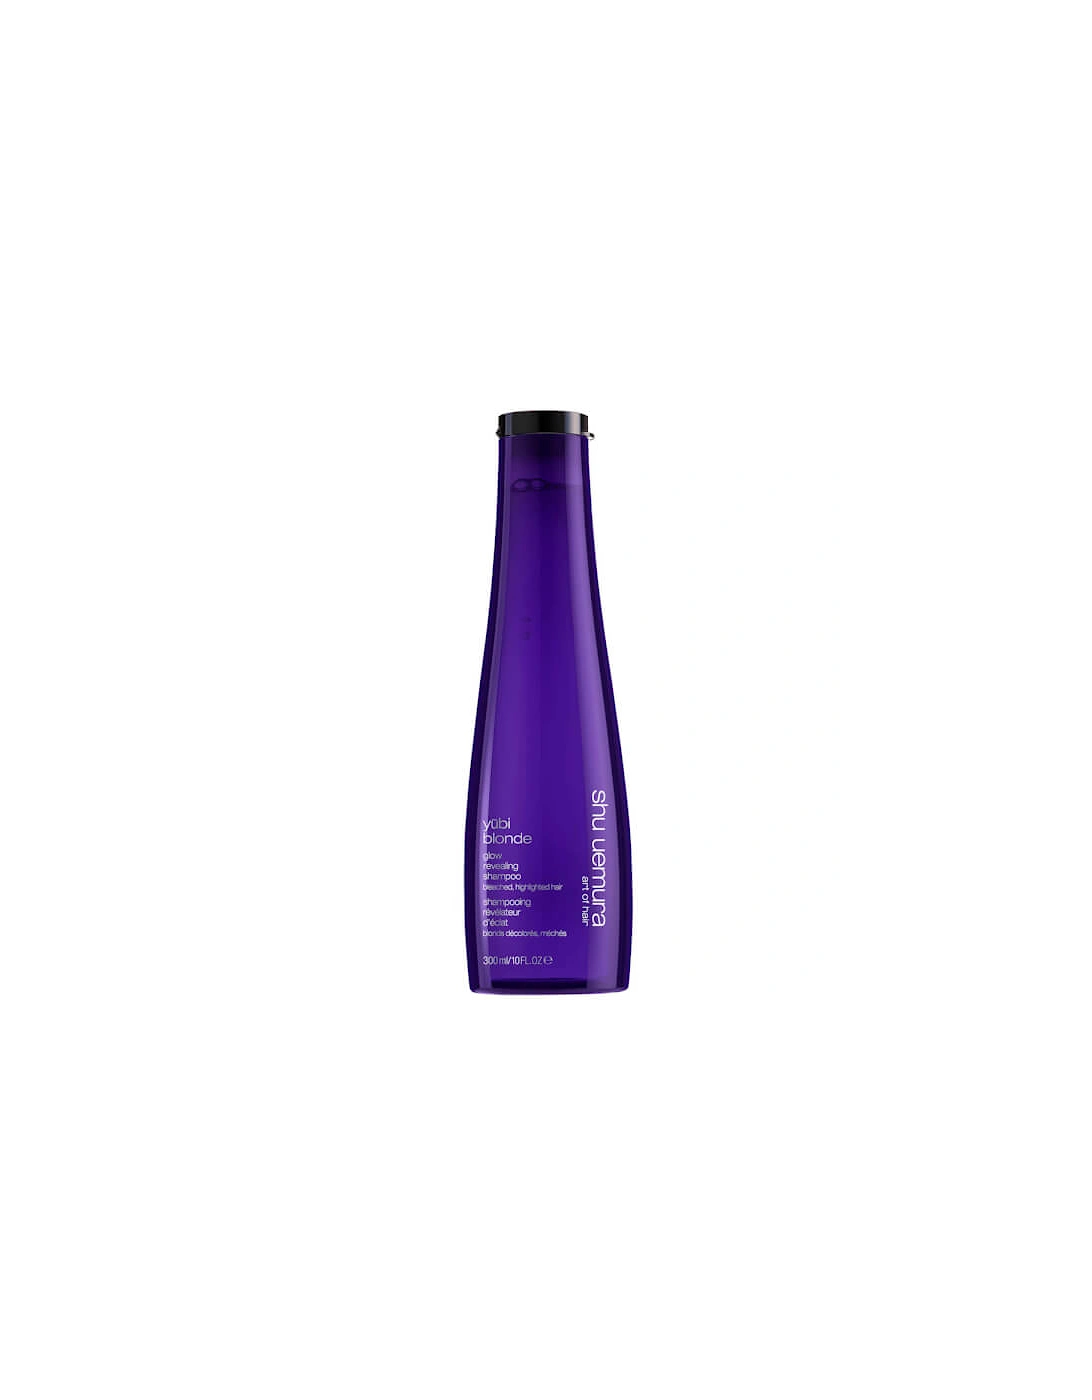 Art of Hair Yubi Blonde Glow Revealing Shampoo for Bleached, Highlighted Blonde Hair 300ml, 2 of 1